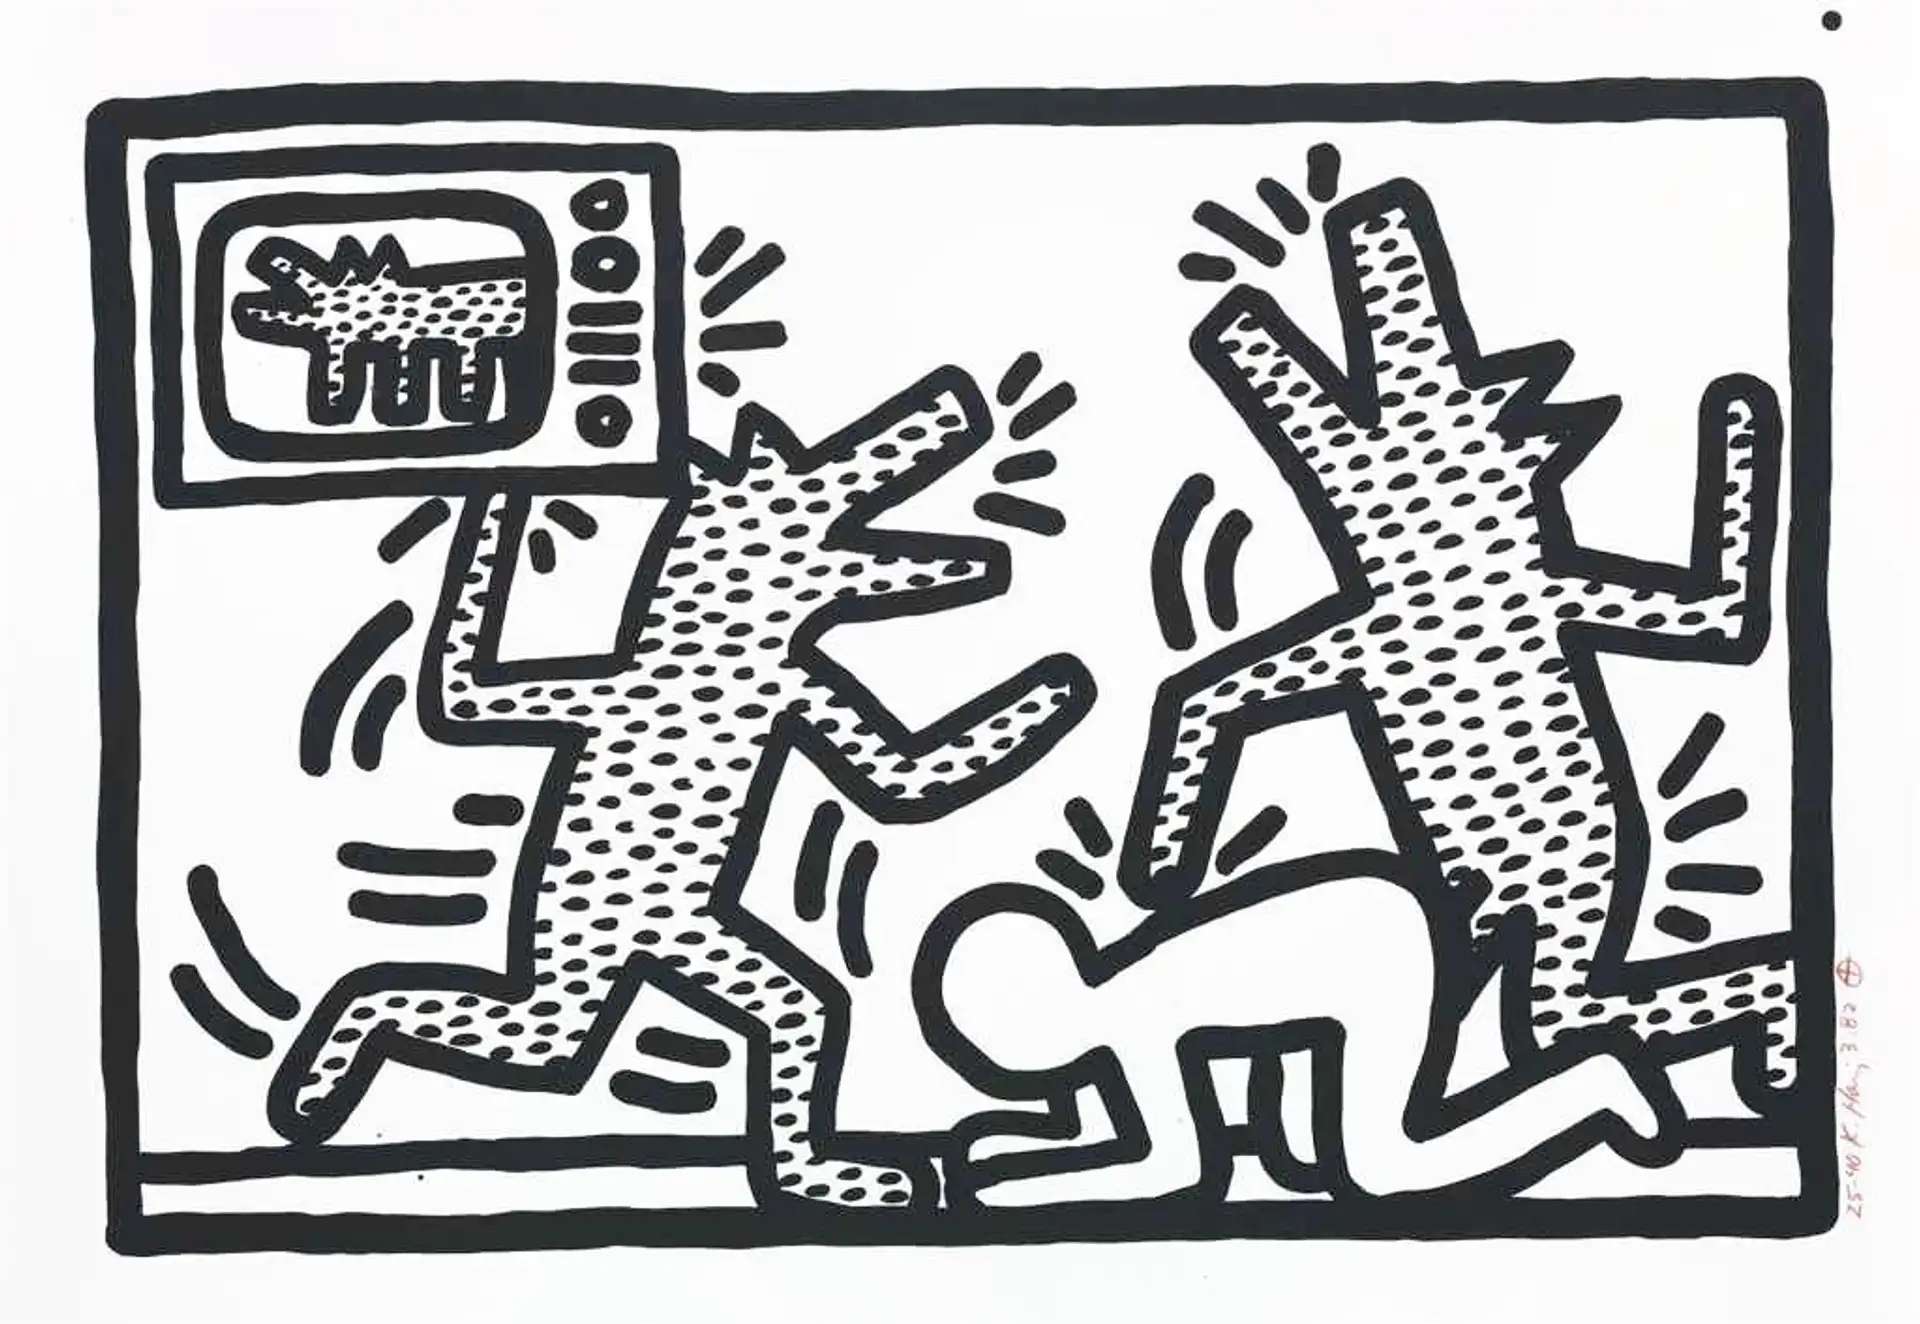 Barking Dogs by Keith Haring